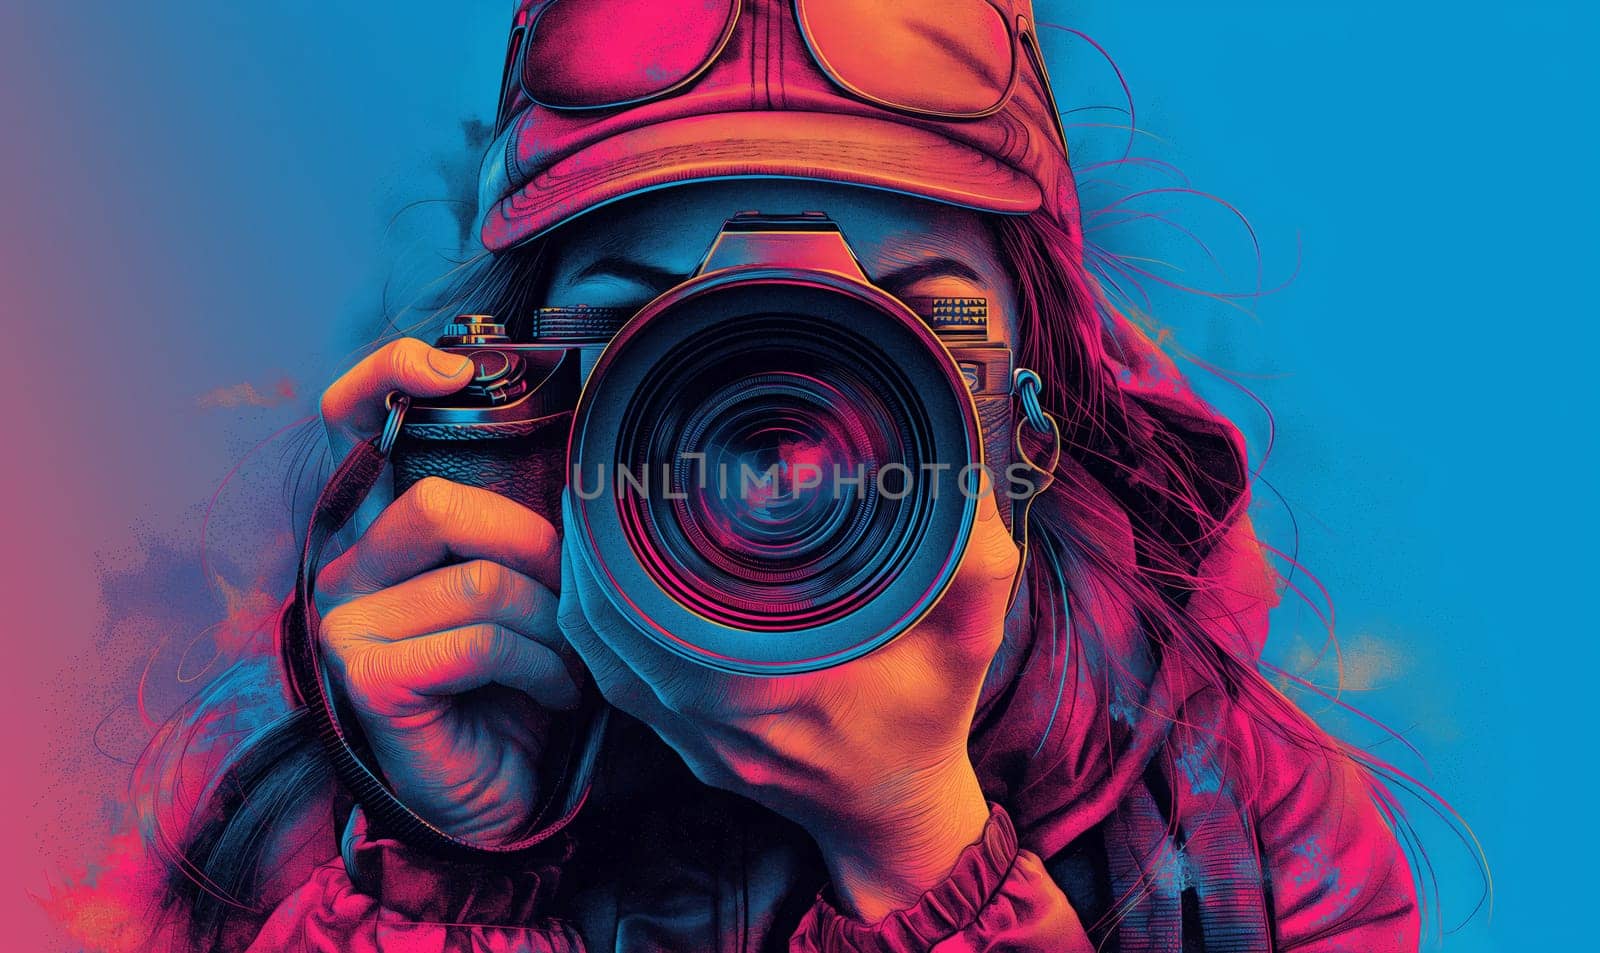 A woman takes a picture with a DSLR camera in an airbrush style. by Fischeron